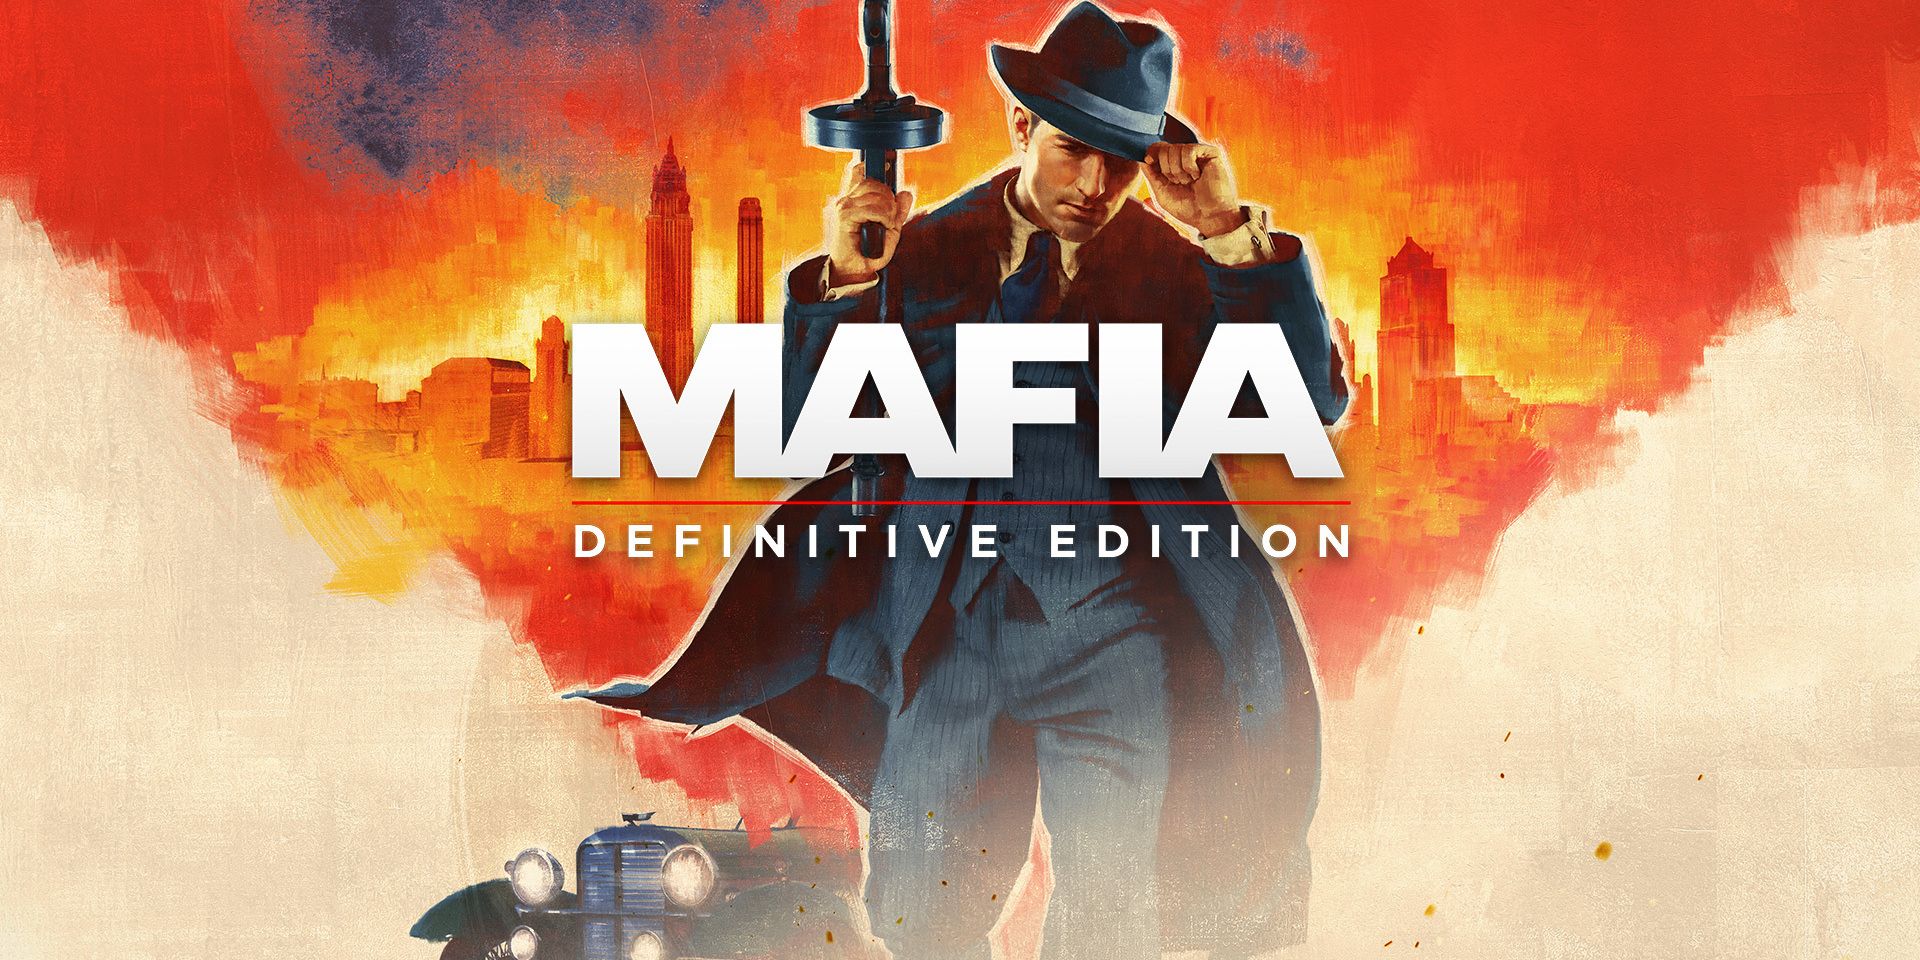 What Will Mafia Definitive Edition Change From the Original